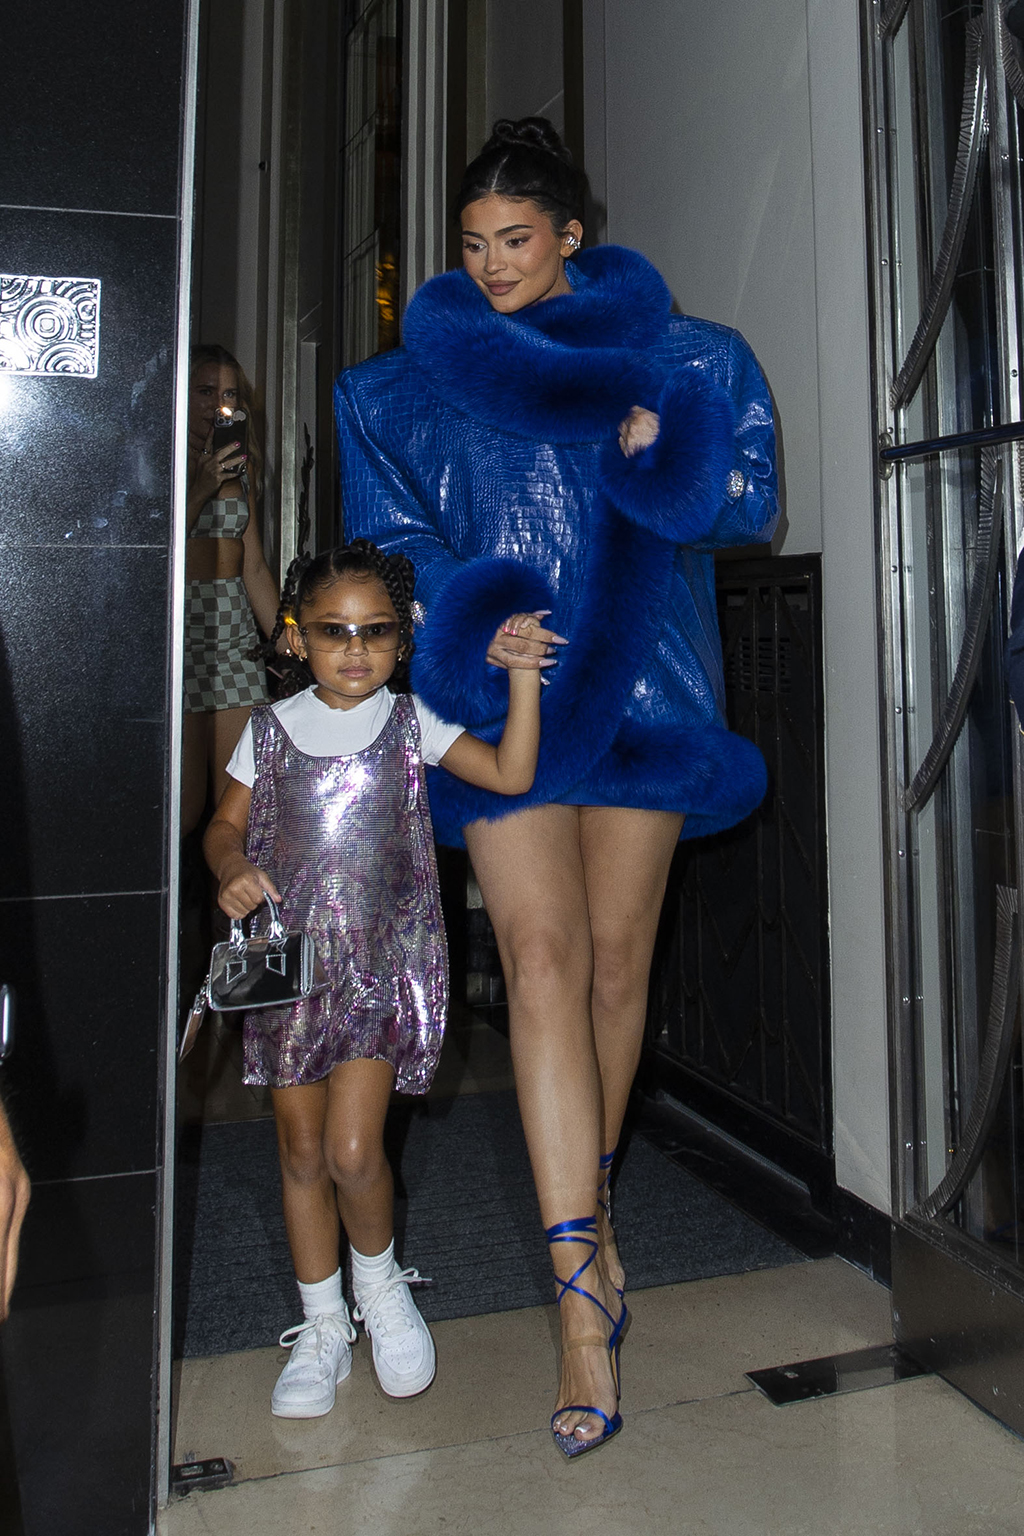 Kylie Jenner and her daughter Stormi in London on Aug 5, 2022.